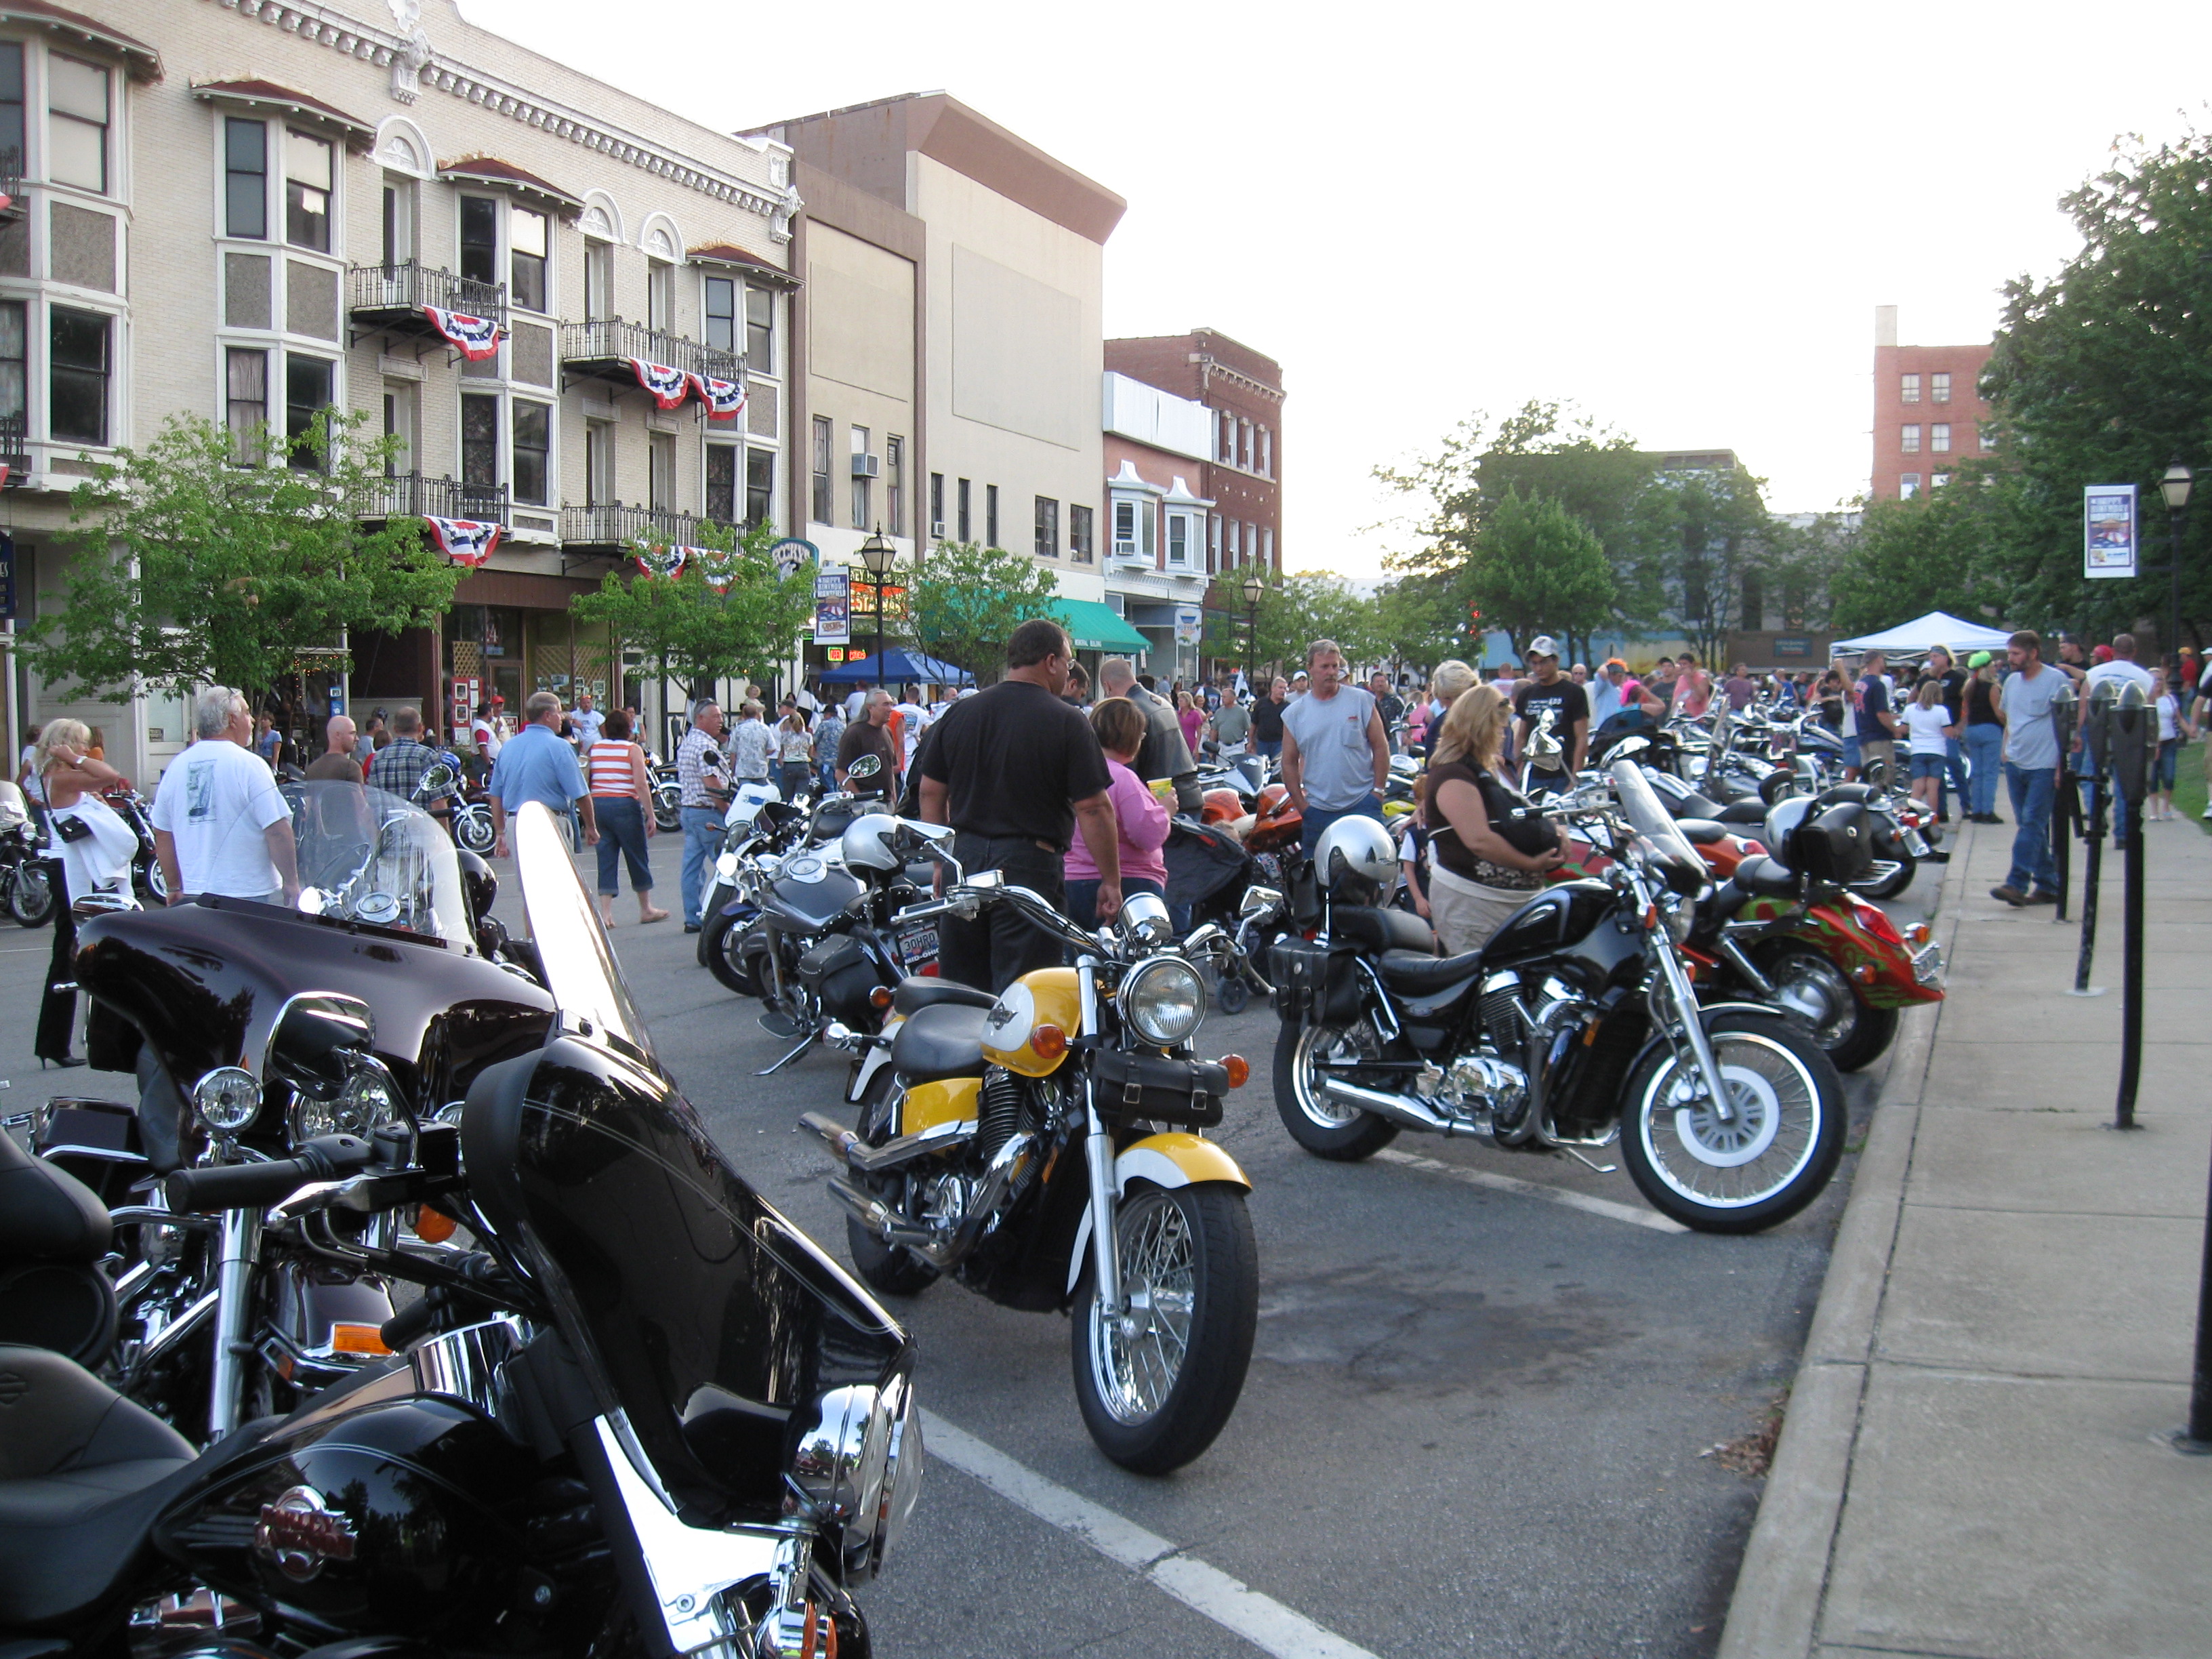 Dates Announced for AMA Vintage Motorcycle Days: